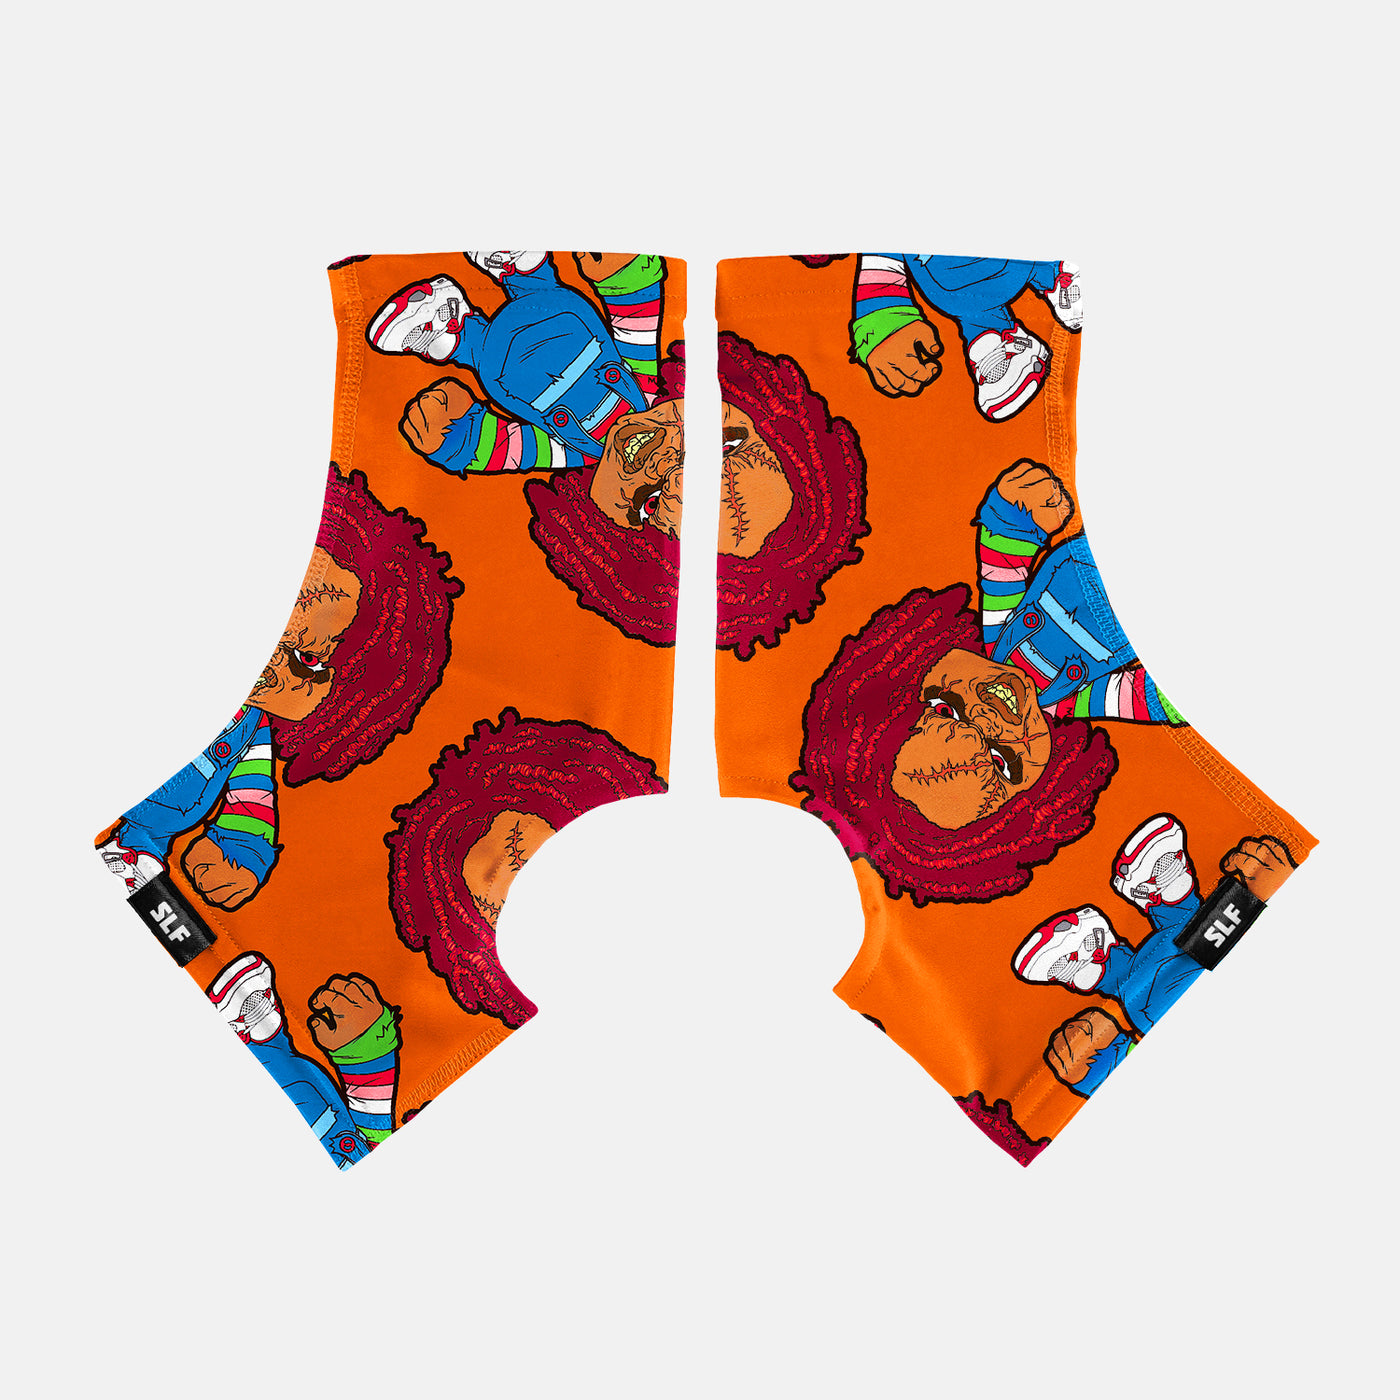 Bad Kid Kids Spats / Cleat Covers